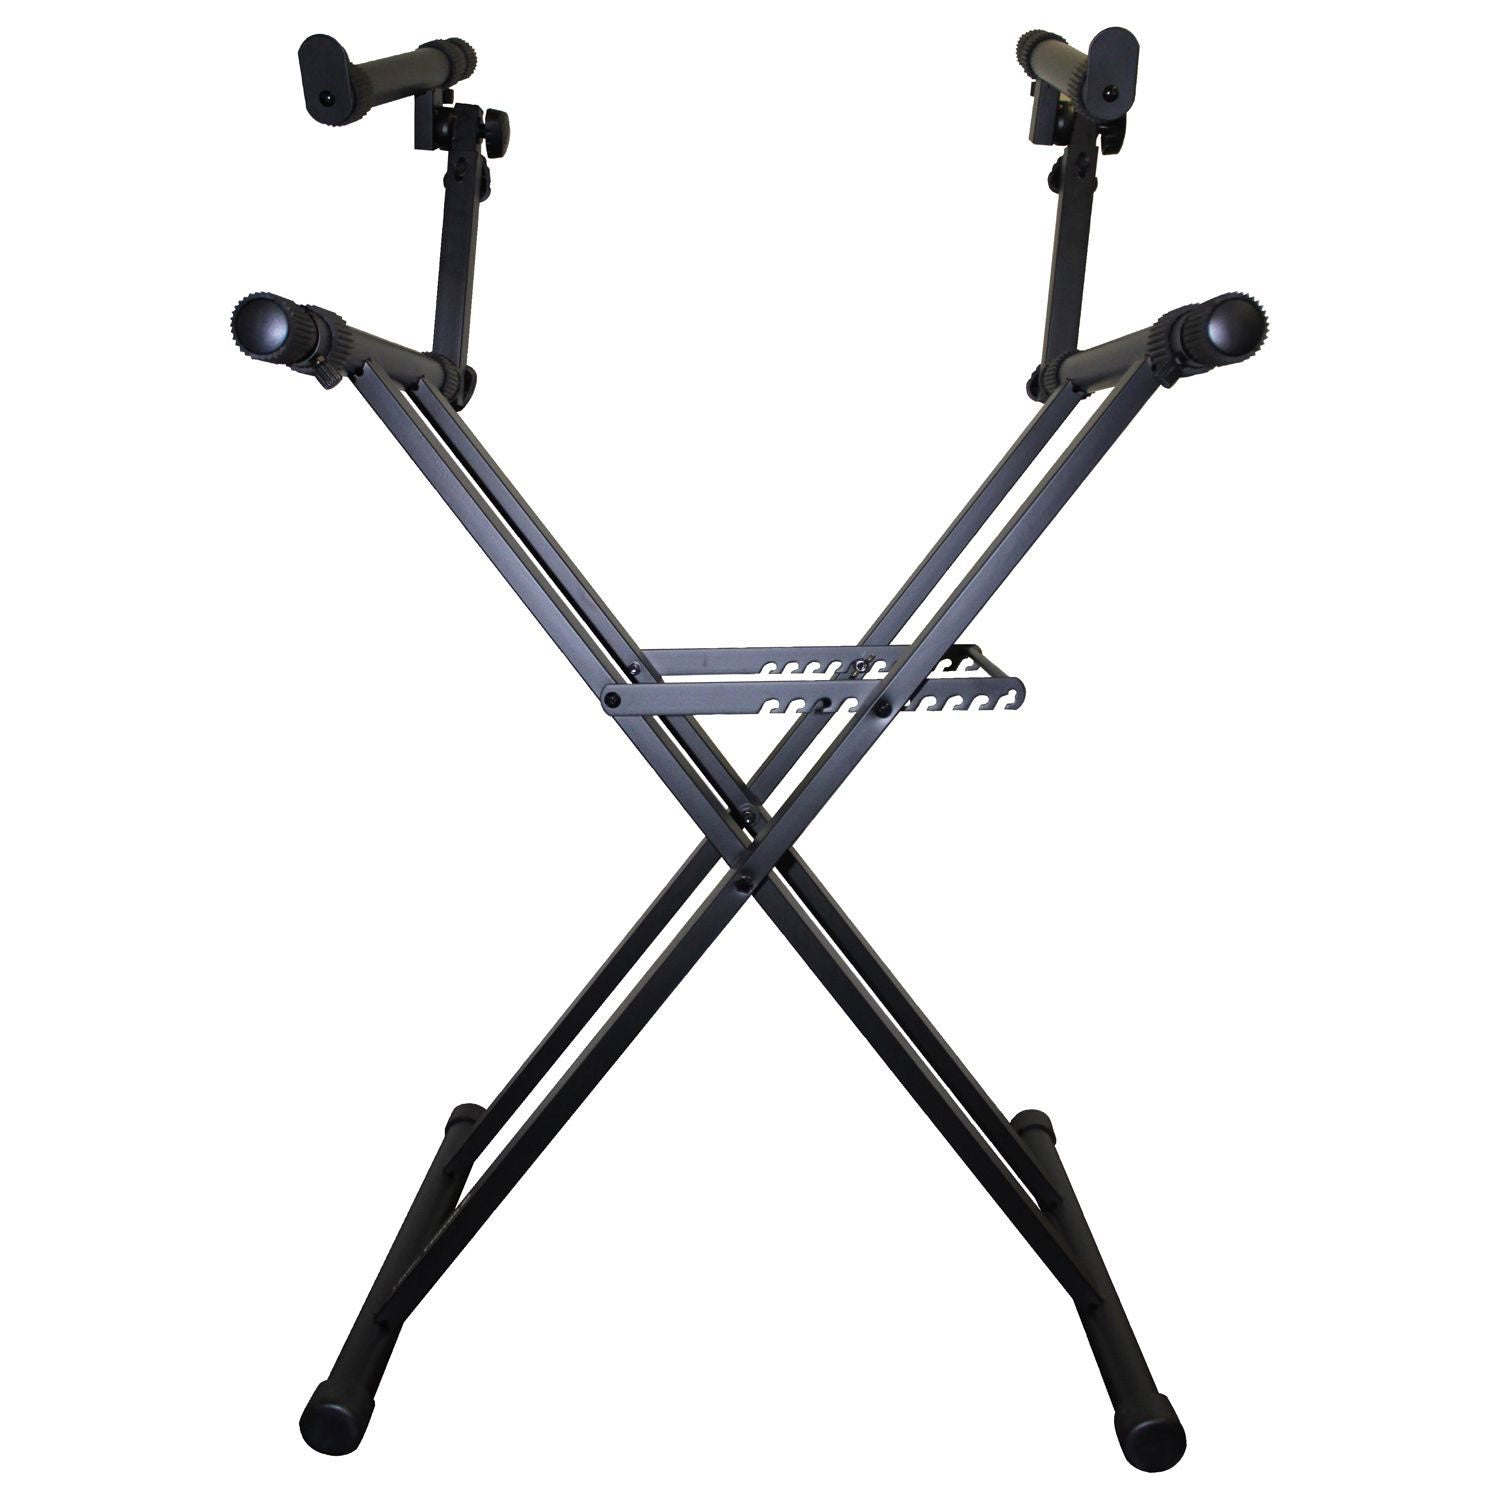 B-Stock: Odyssey LTBXS2, Two Tier X-Stand For DJ Coffins and Controller Cases - Black - Hollywood DJ